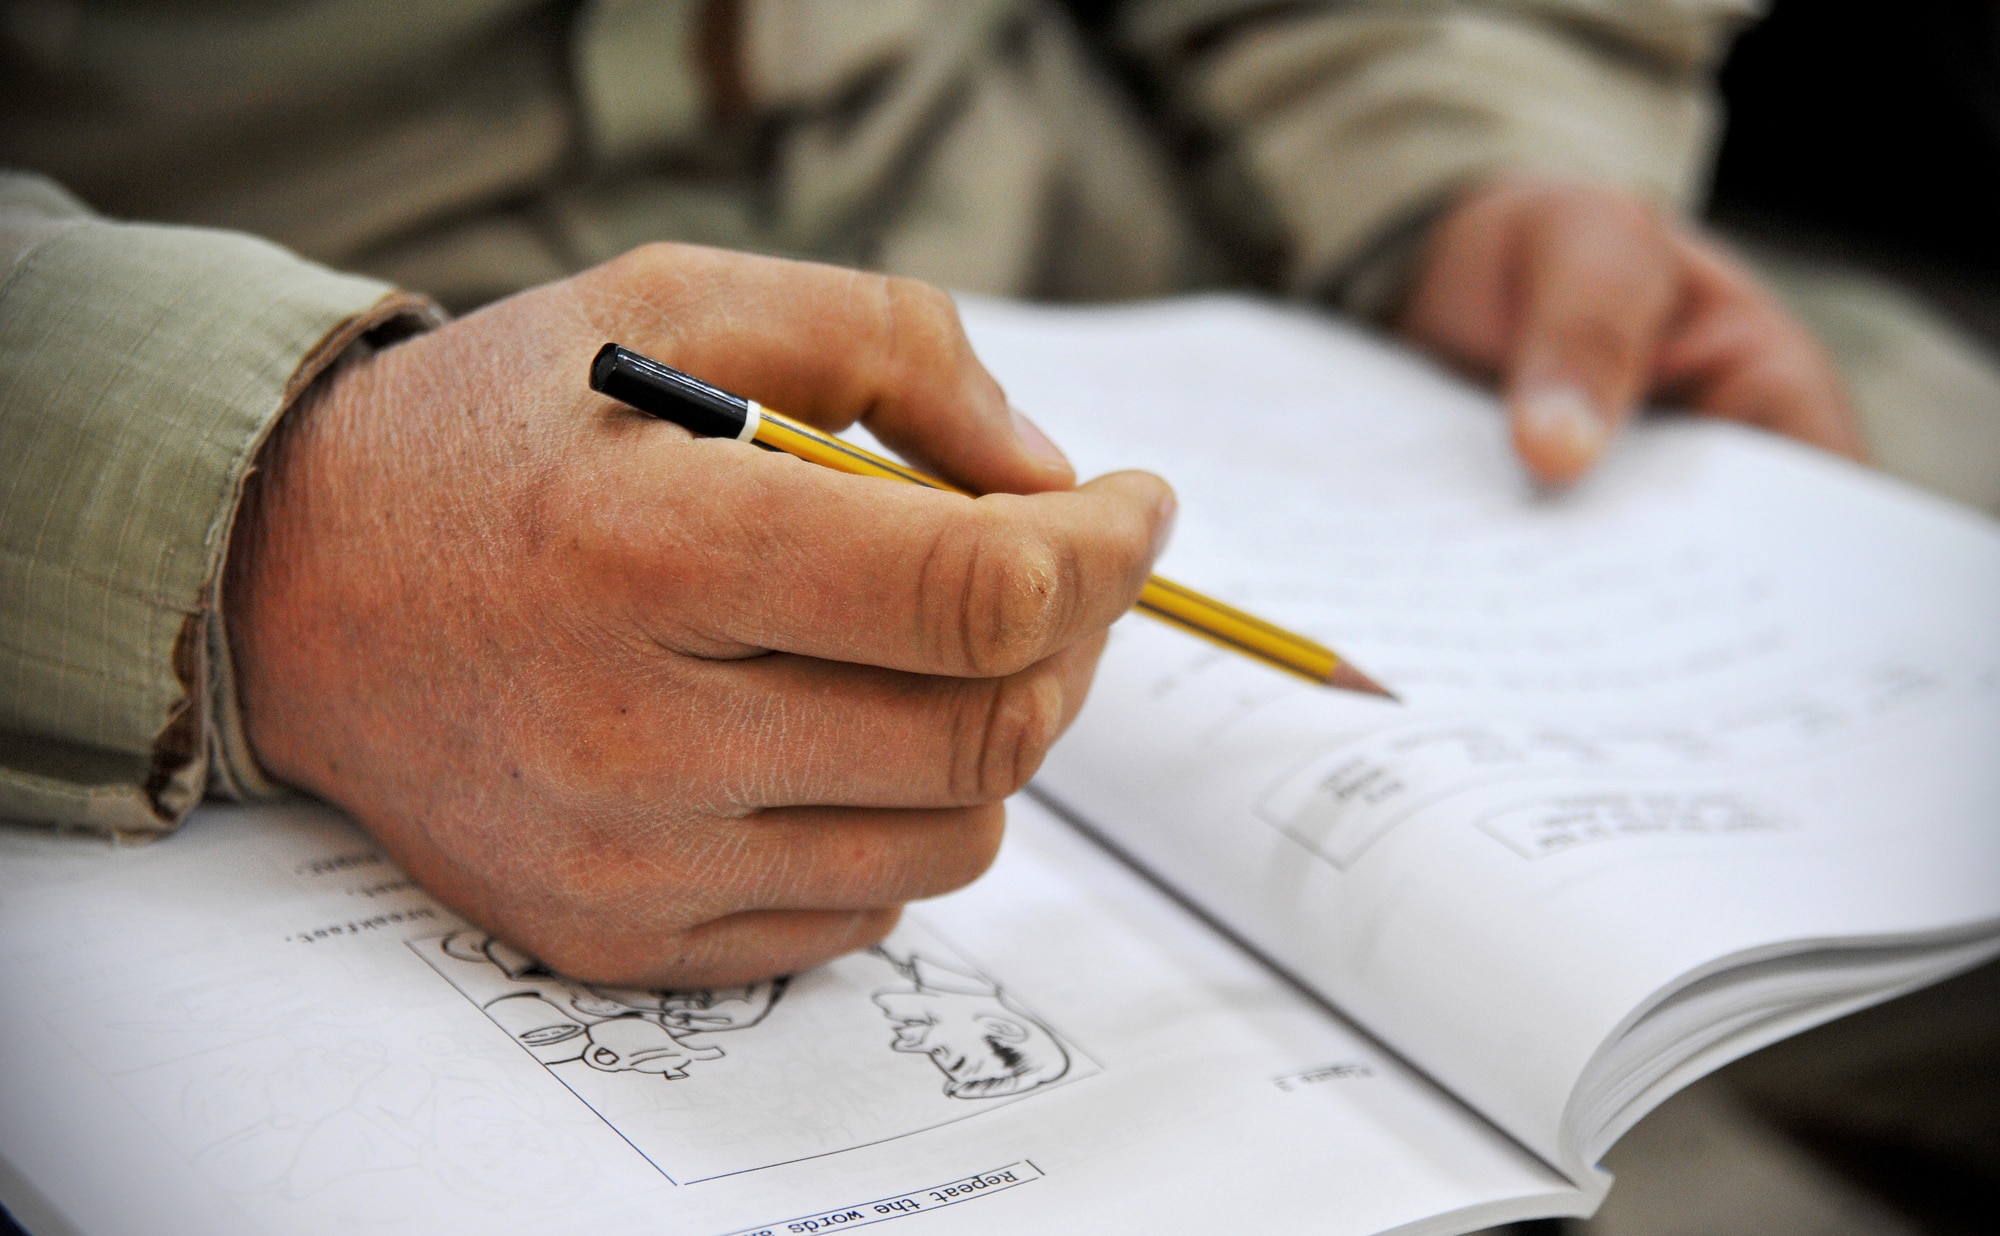 An Iraqi air force airman fills in the blanks of a test booklet during an English language class at the Iraqi Air Force Training School Dec. 13, 2010, in Taji, Iraq. The English language training is based on the Defense Language Institutes' program for teaching the English language. (U.S. Air Force photo/Senior Airman Andrew Lee)
